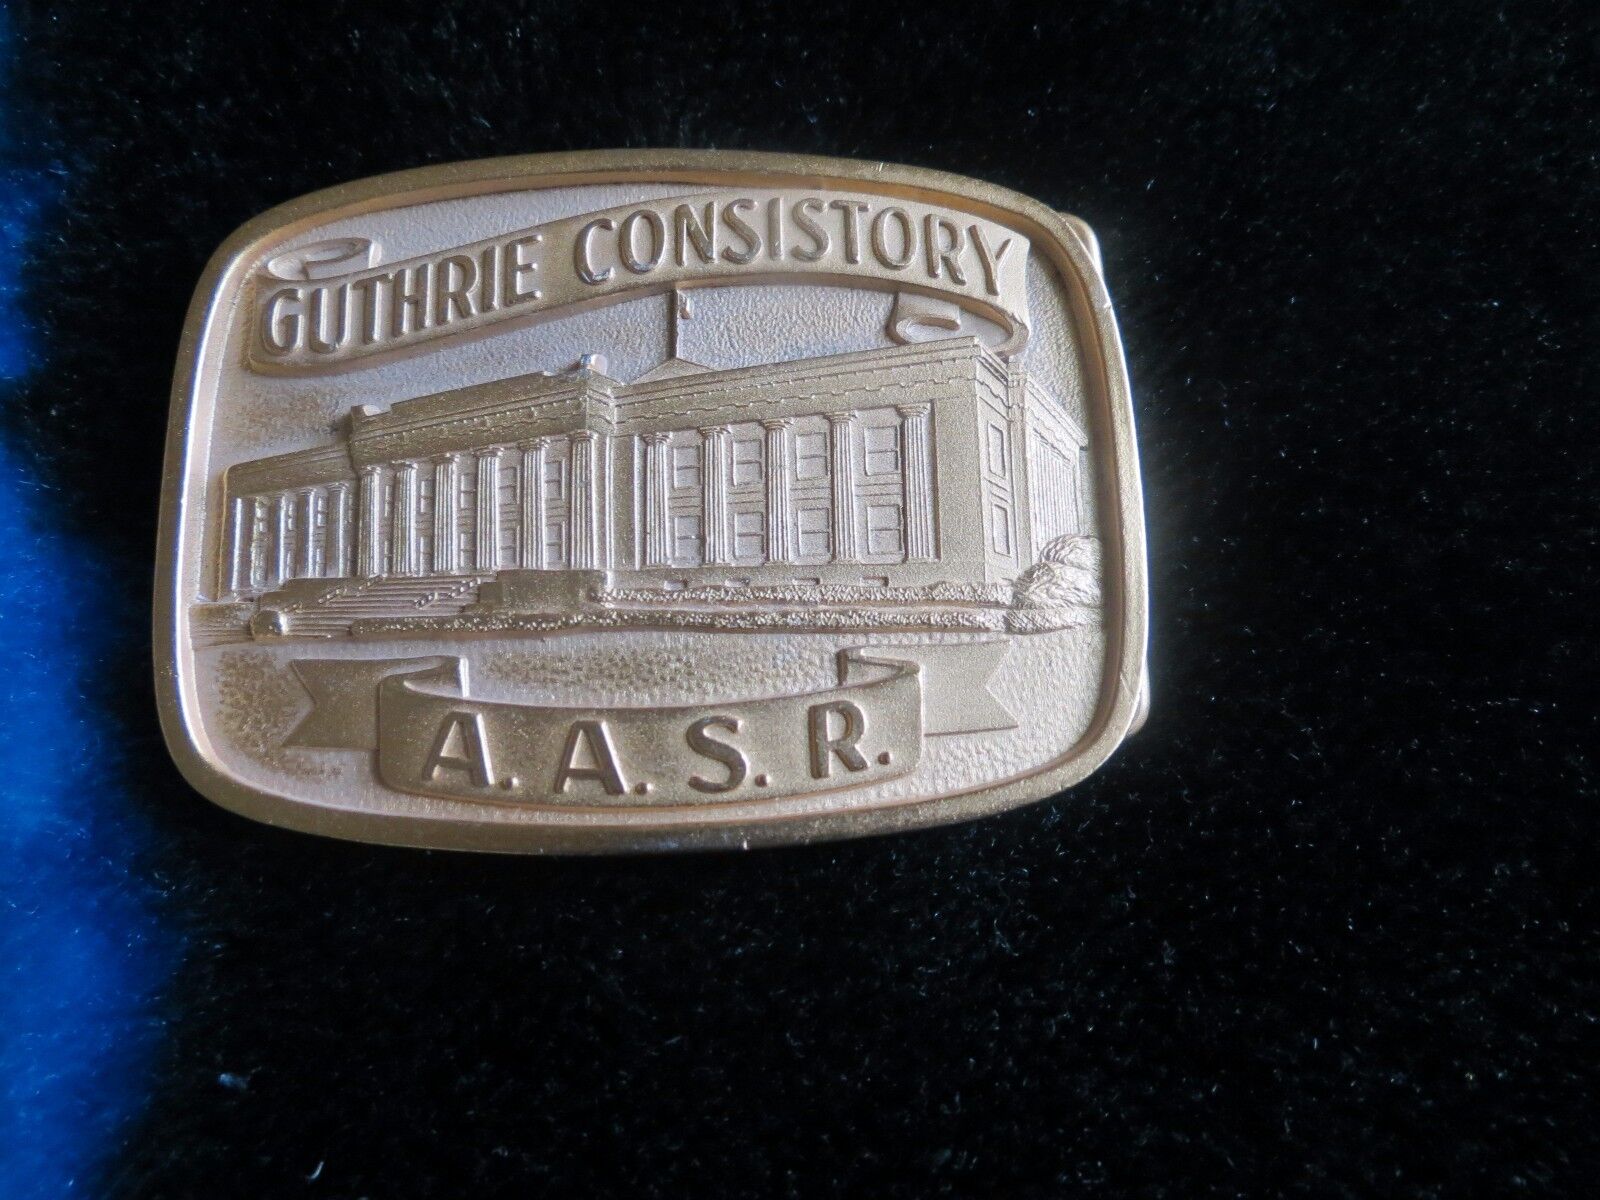 Guthrie consistory A.A.S.R. belt buckle gold tone